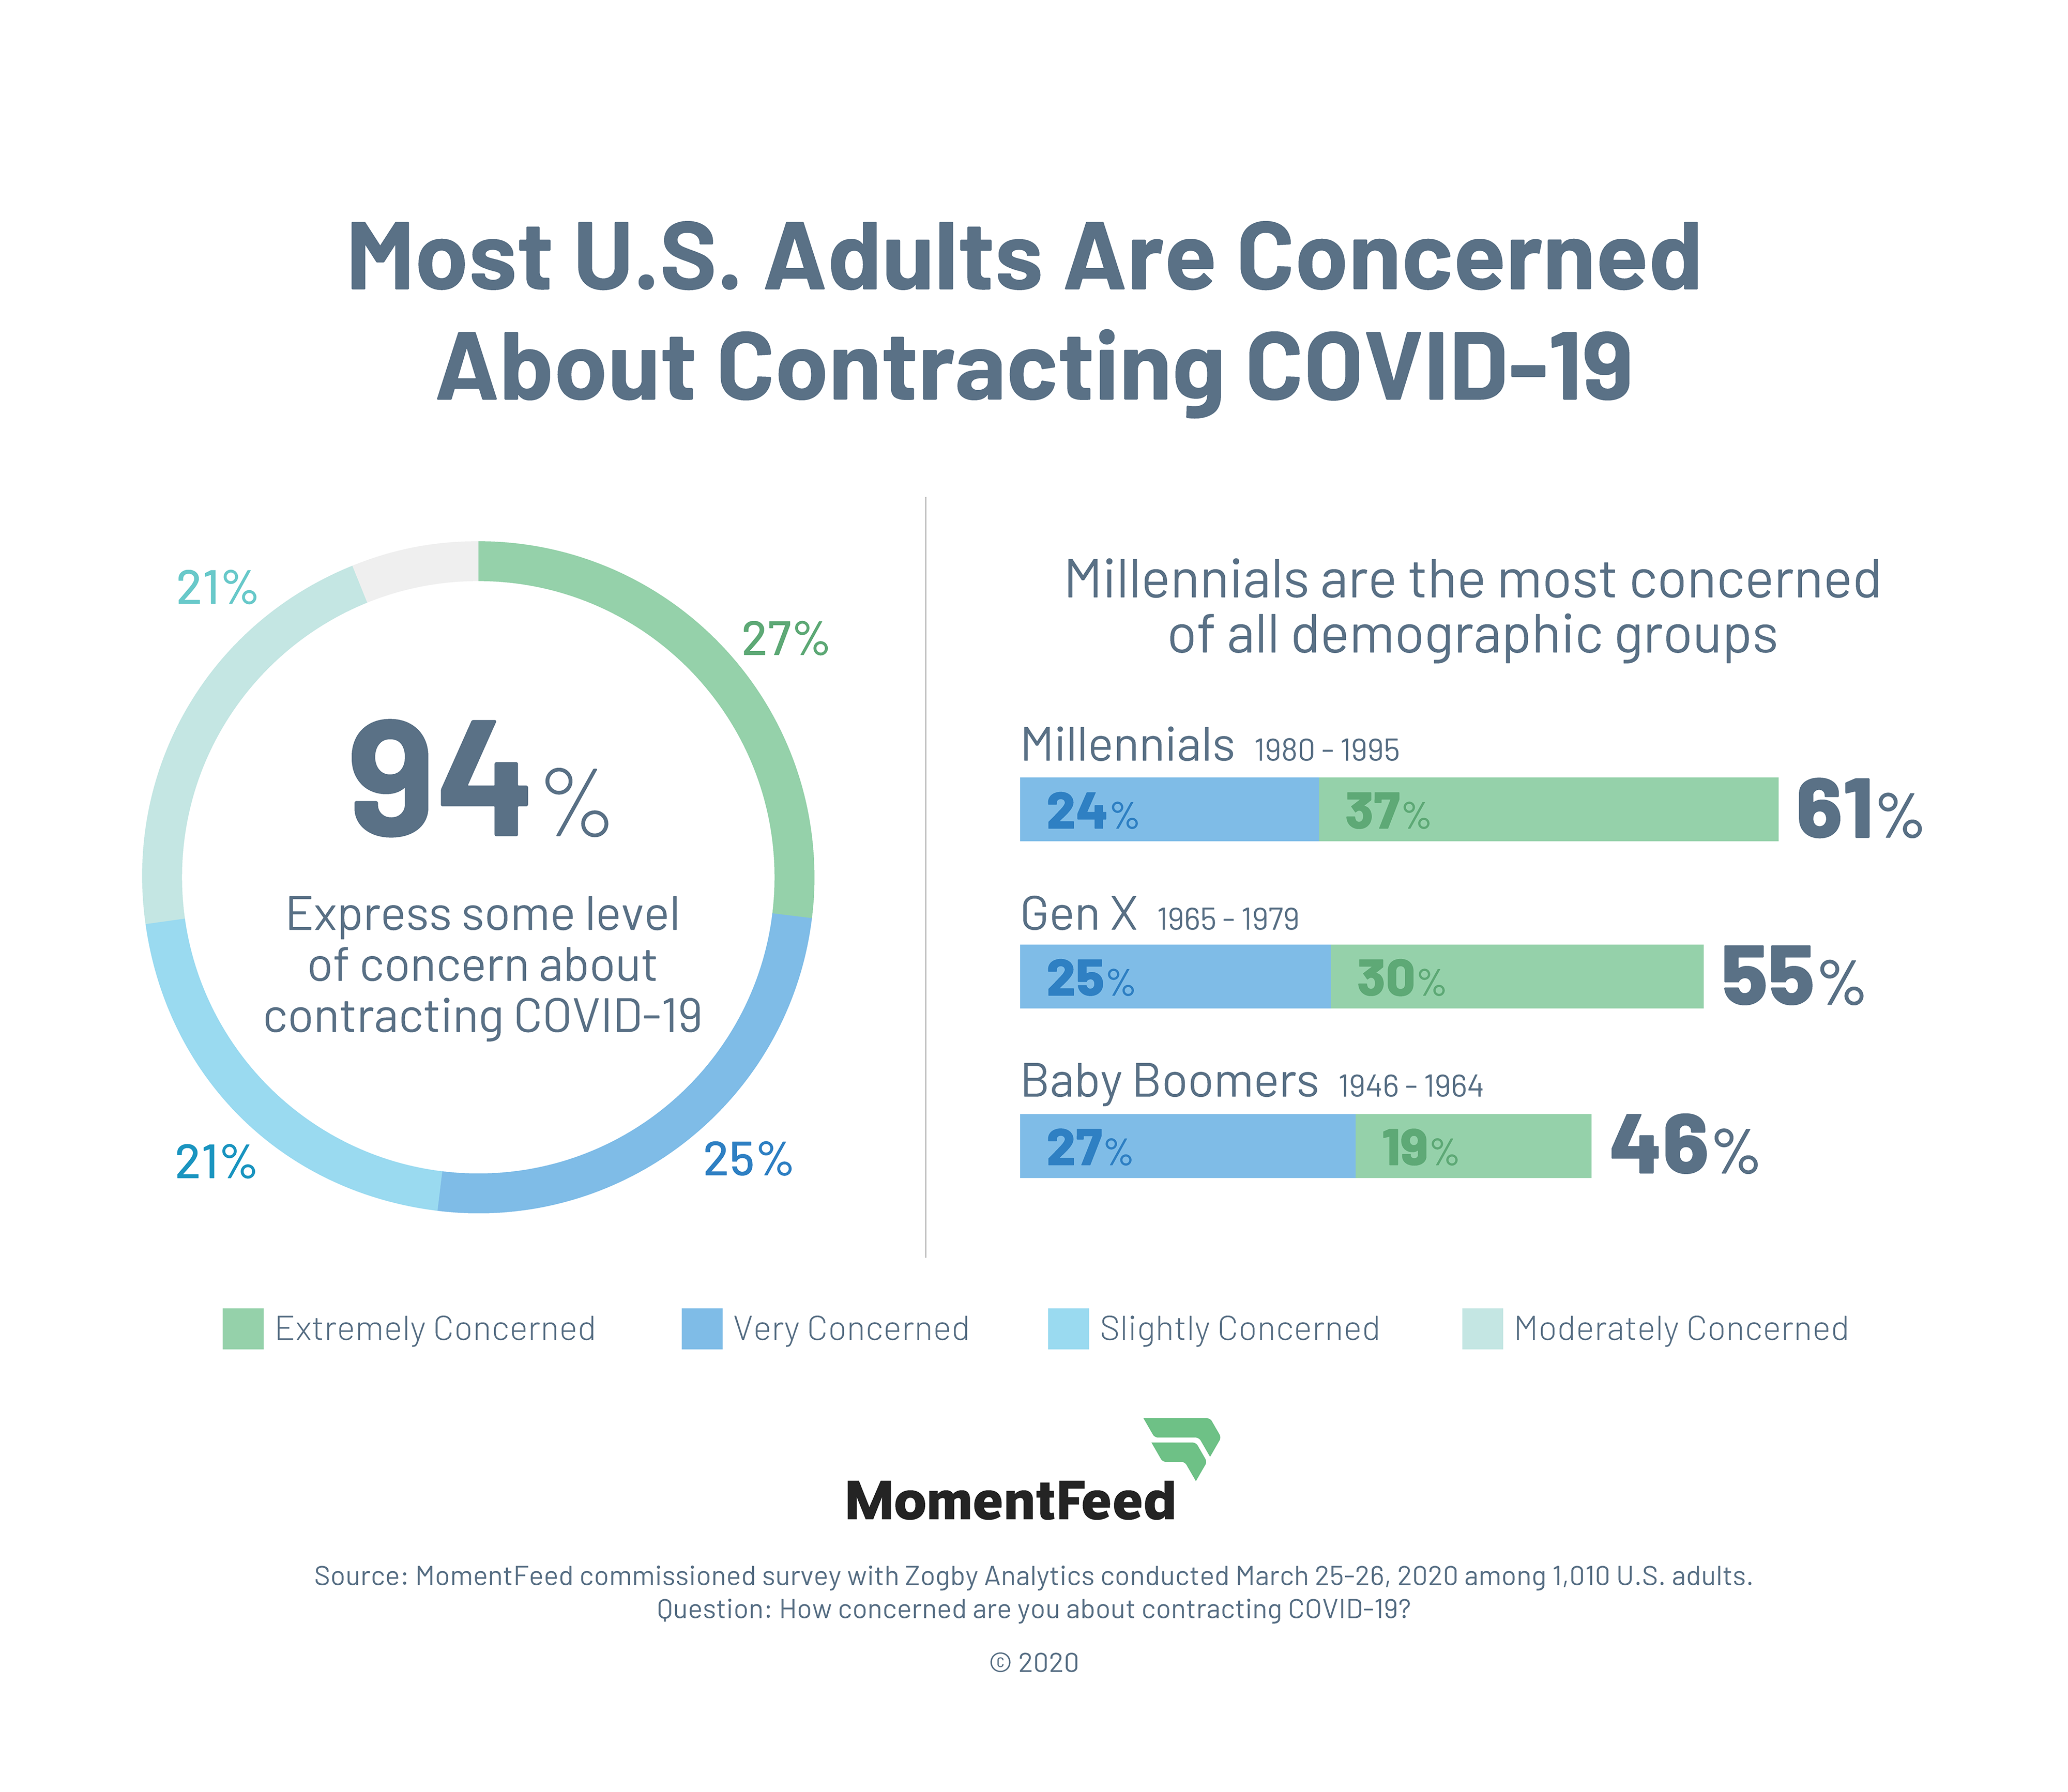 MomentFeed survey finds 94% of U.S. adults are concerned about contracting COVID-19